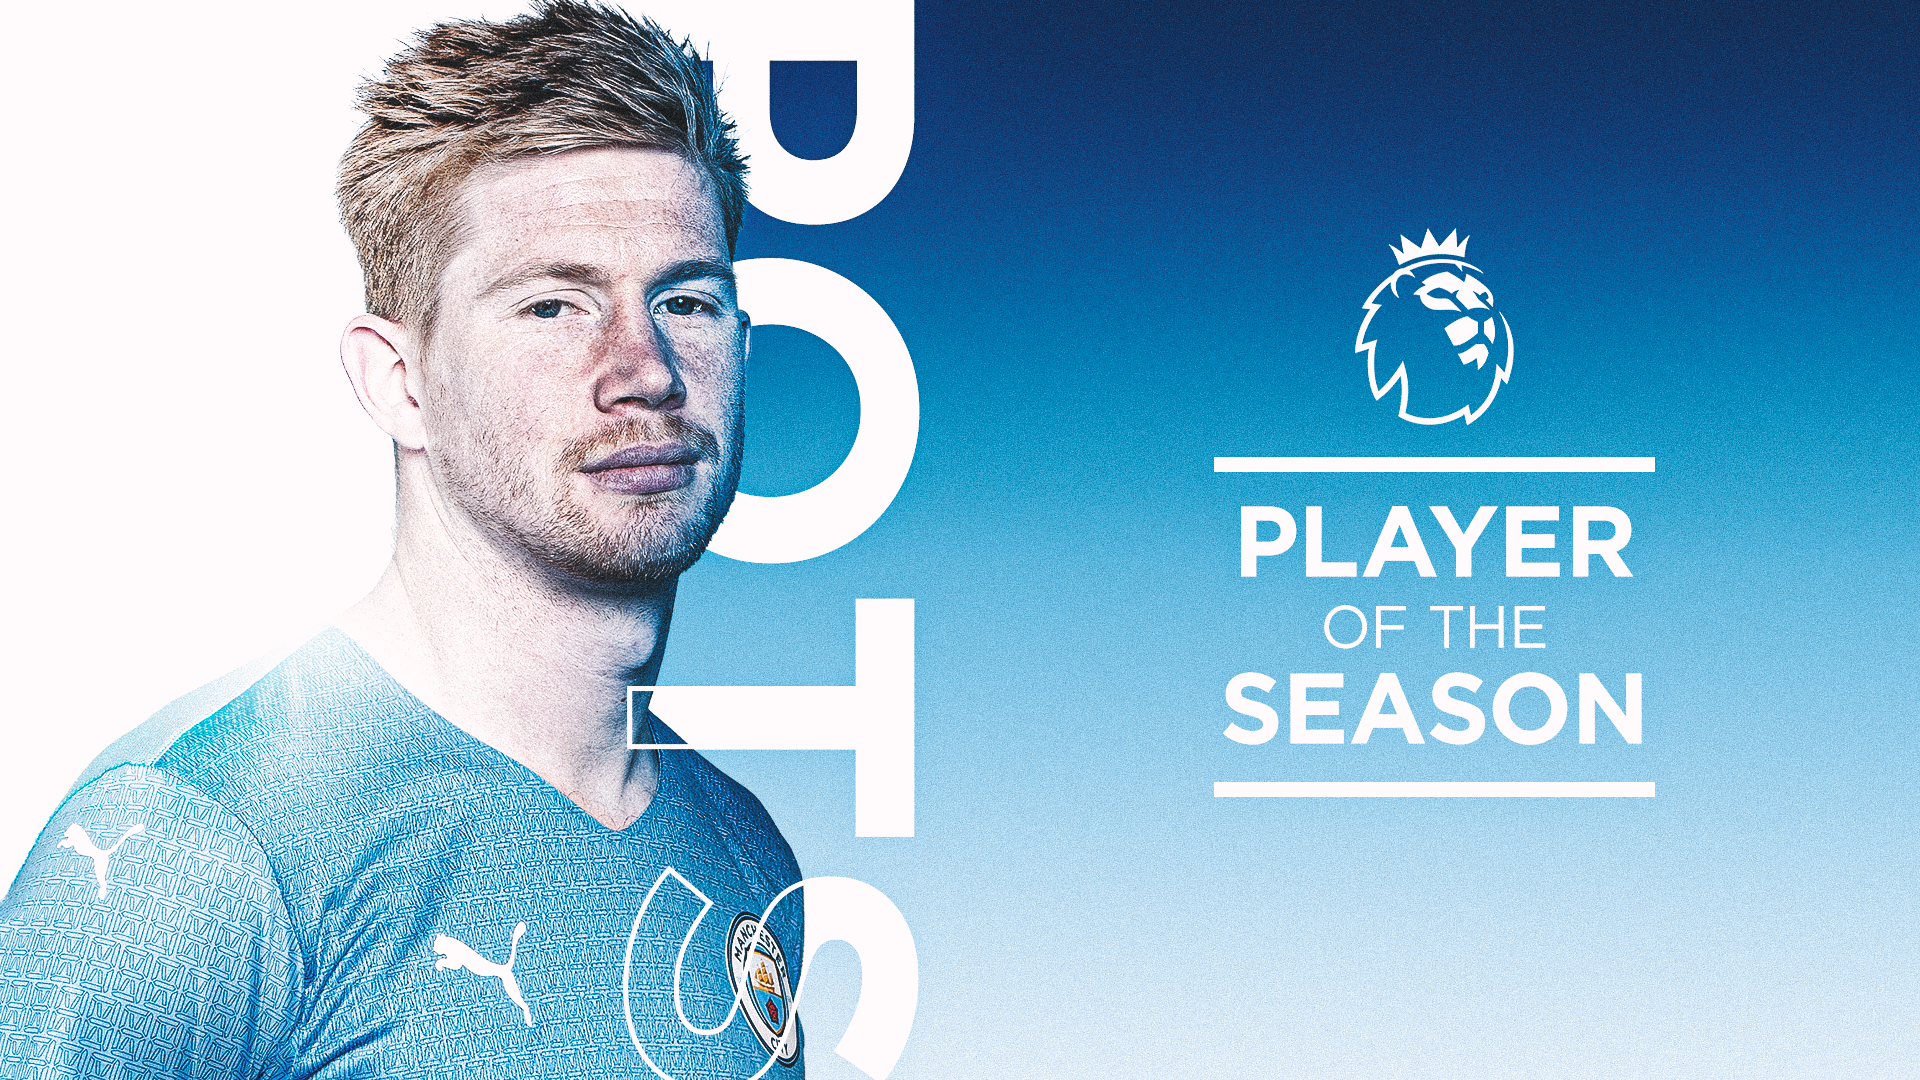 Kevin Bruyne, League Player of the Season